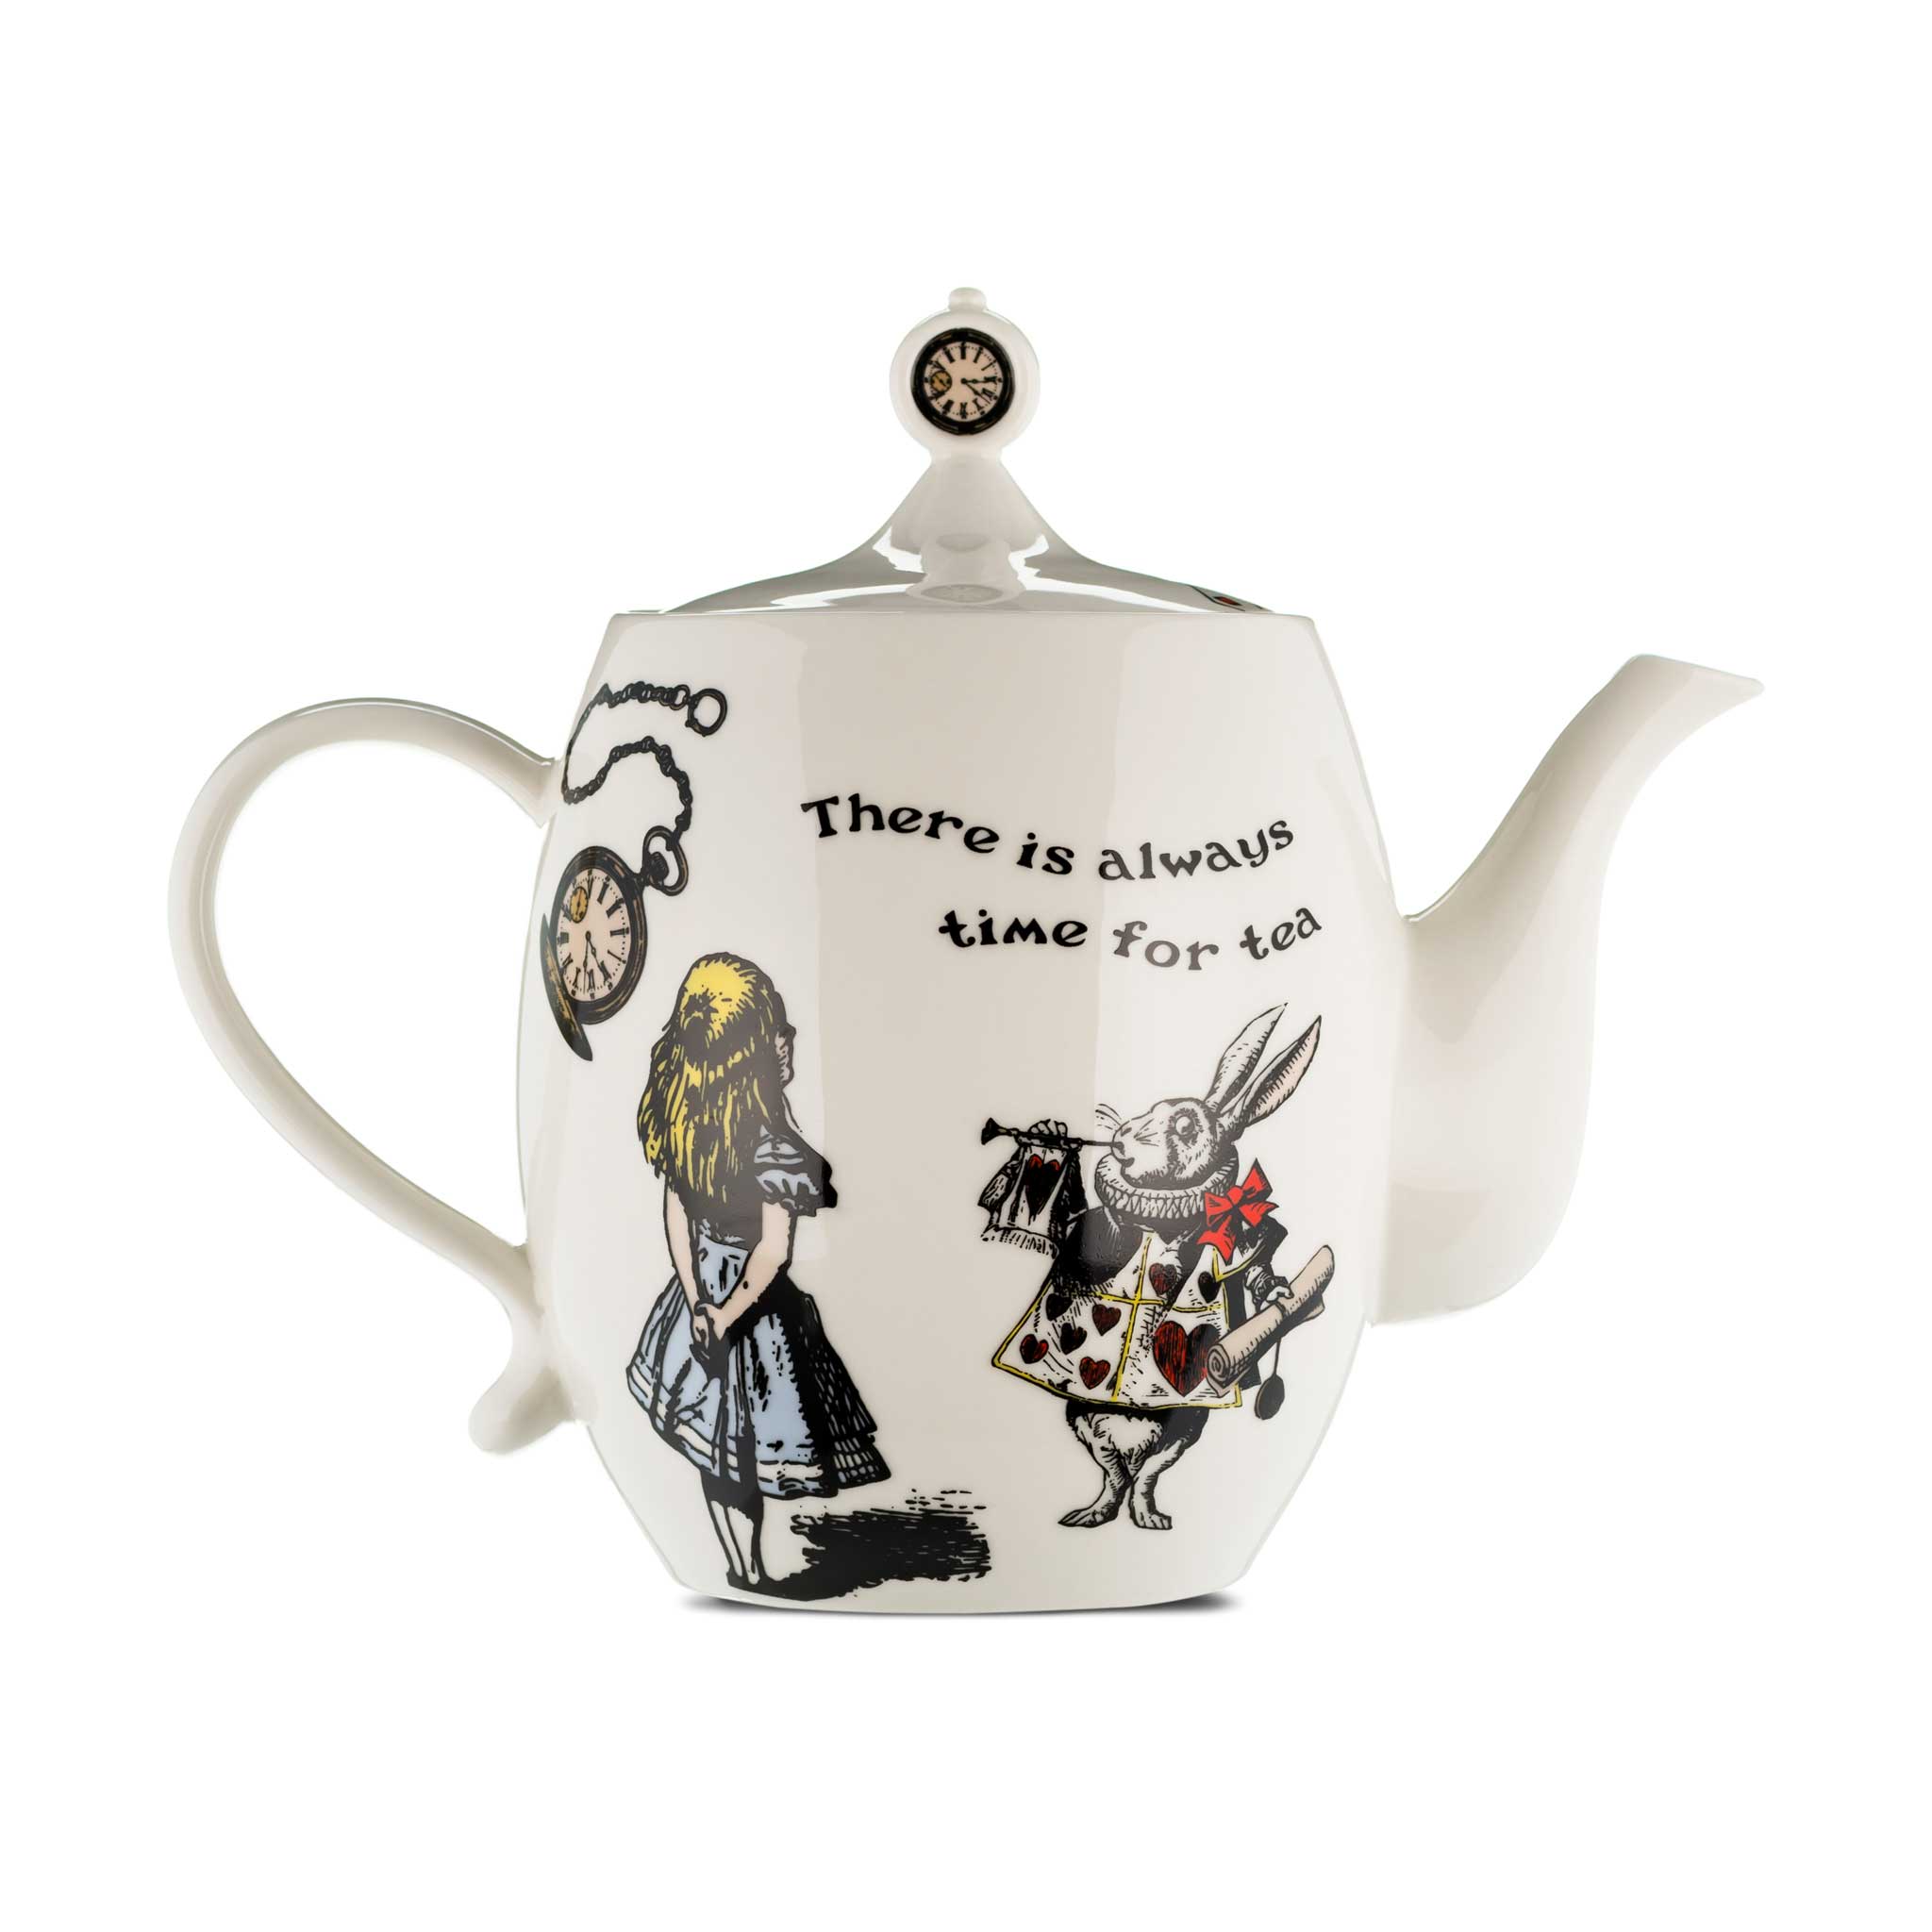 Alice in Wonderland teapot from China Blue